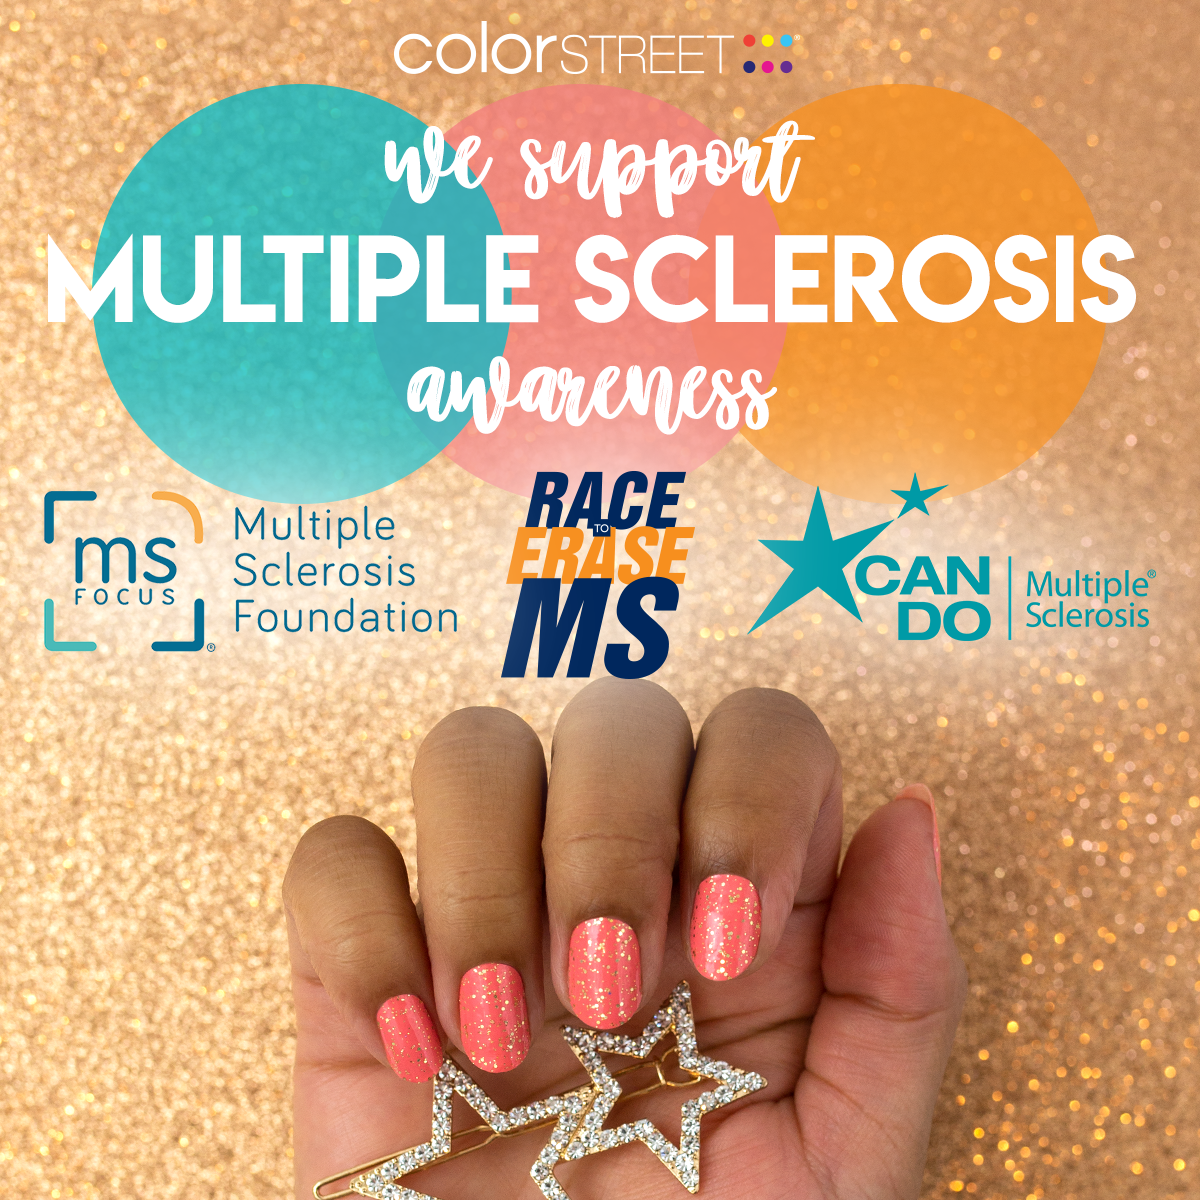 Color Street Foundation pledges 100, 000… Can Do Multiple Sclerosis